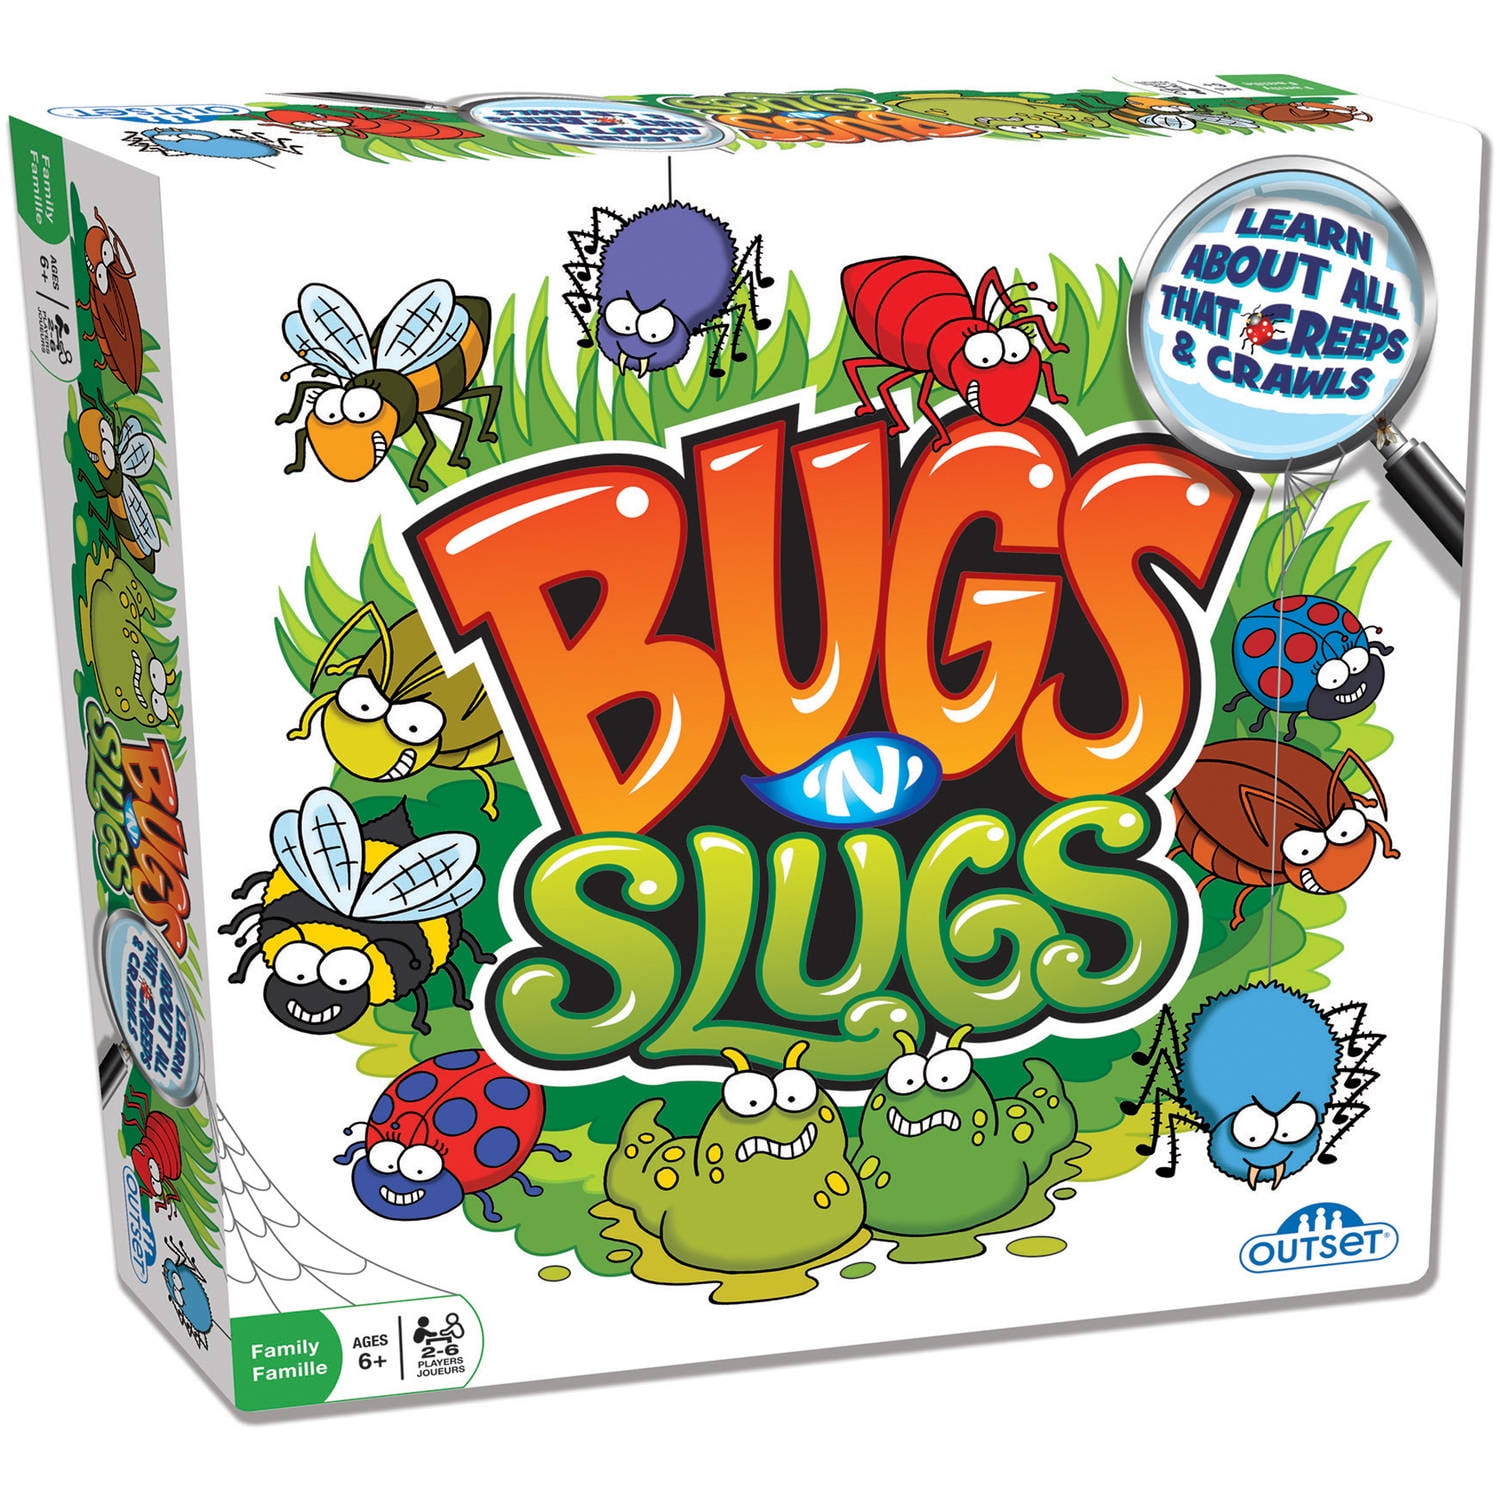 how many bugs in a box game